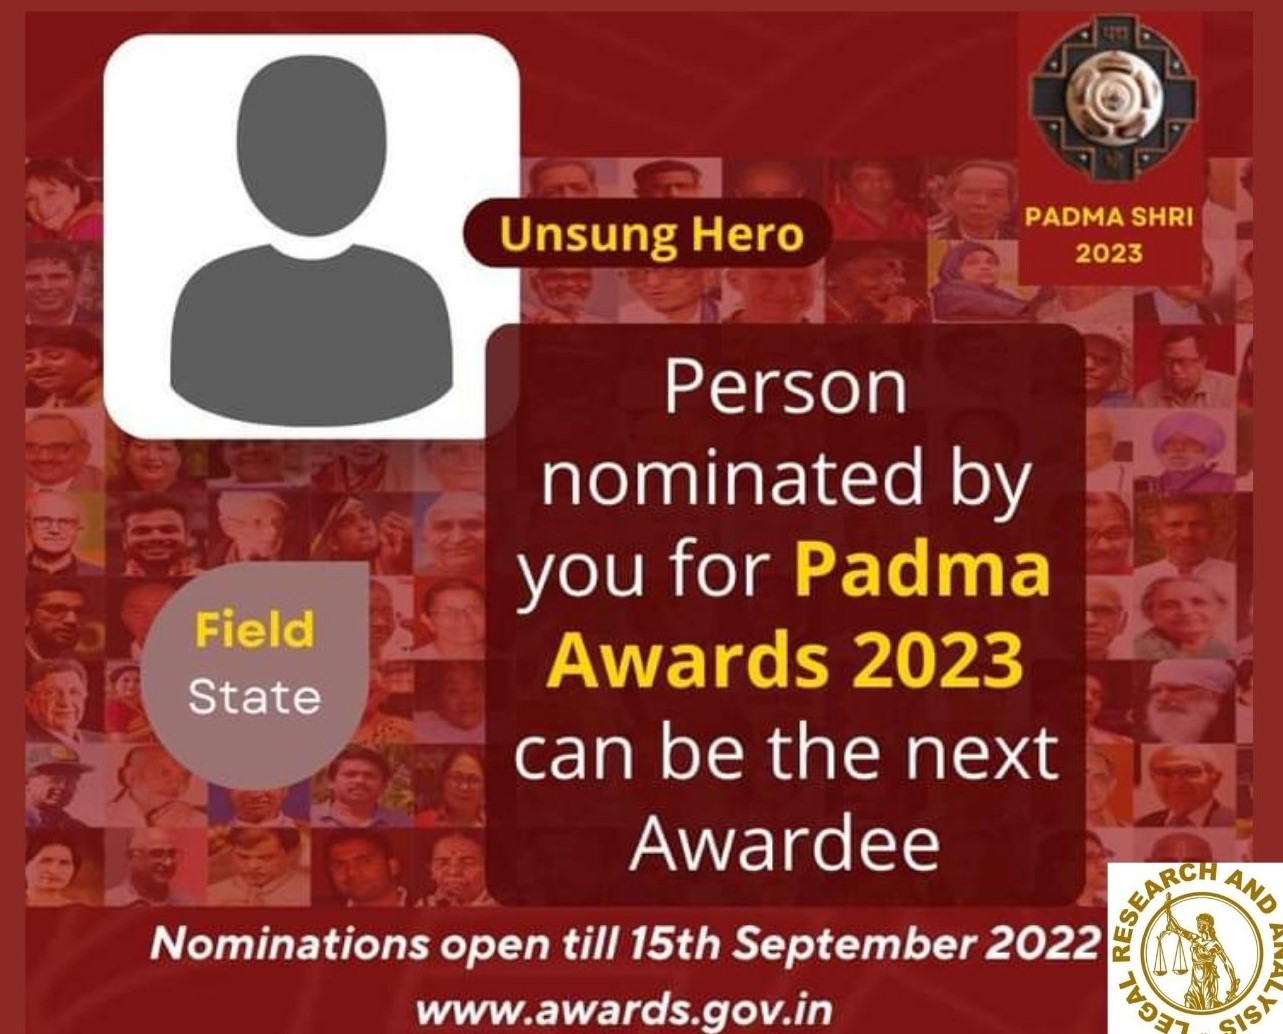 Nominations for the Padma Awards 2023 can be submitted online until September 15th.